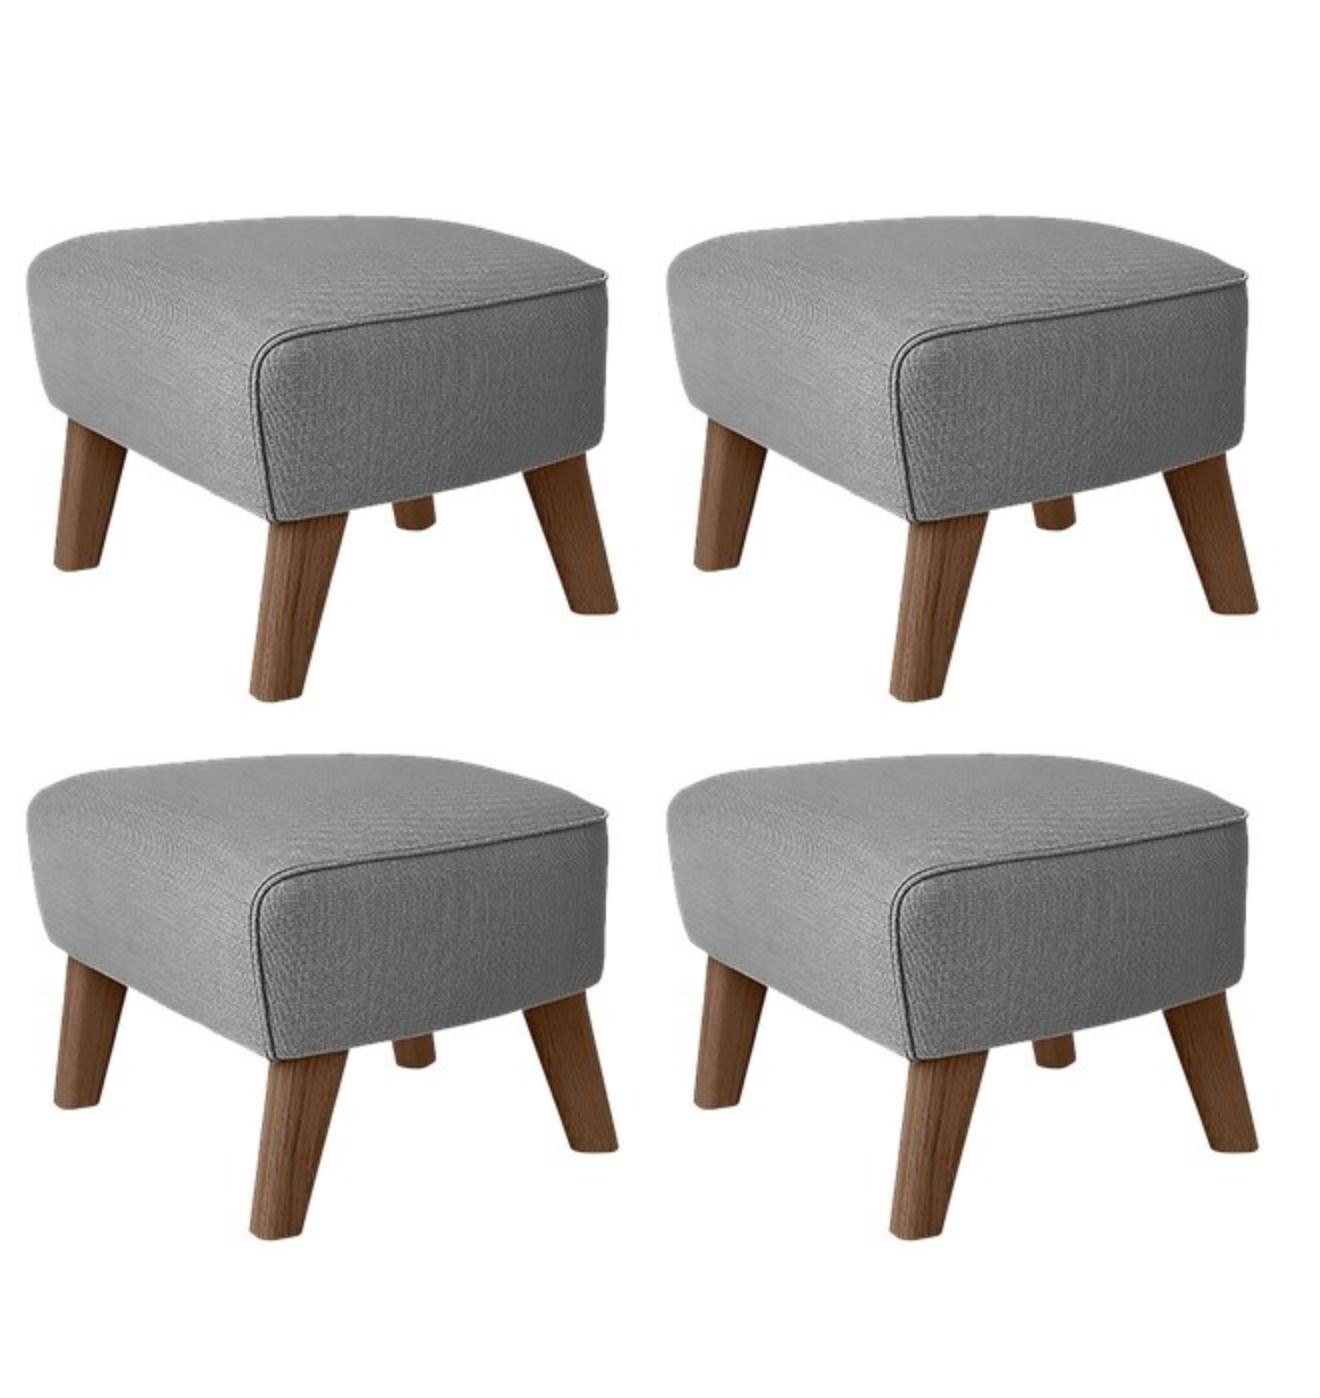 Set of 4 grey and smoked oak Sahco Zero footstool by Lassen
Dimensions: W 56 x D 58 x H 40 cm 
Materials: Textile
Also available: Other colors available.

The my own chair footstool has been designed in the same spirit as Flemming Lassen’s